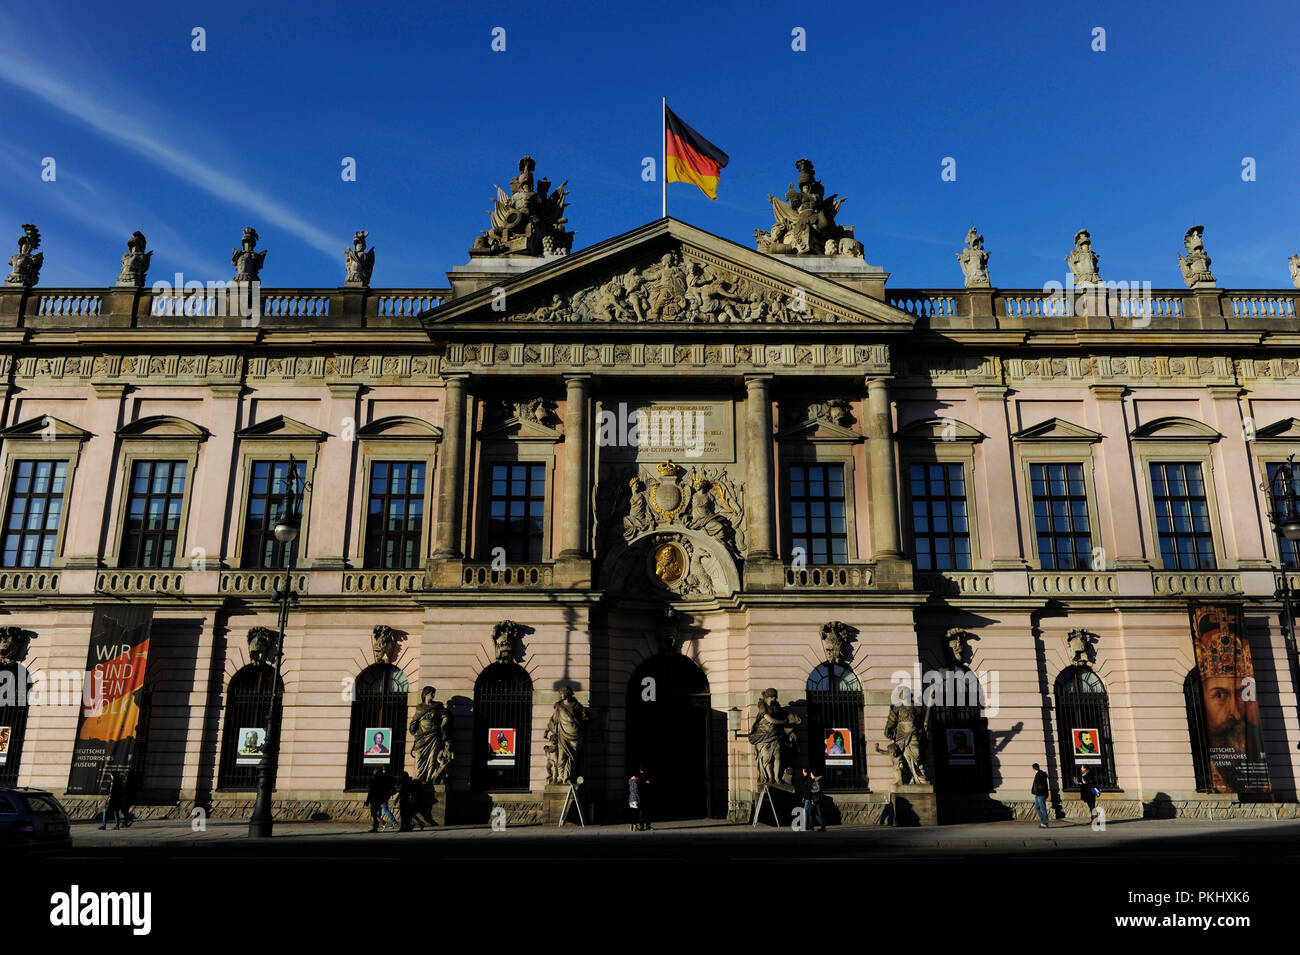 Germany. Berlin. German Historical Museum 'Deutsches Historisches Museum', located in the Old Arsenal ' Zeughaus', built between 1695-1730 in Baroque style. Main facade. Stock Photo